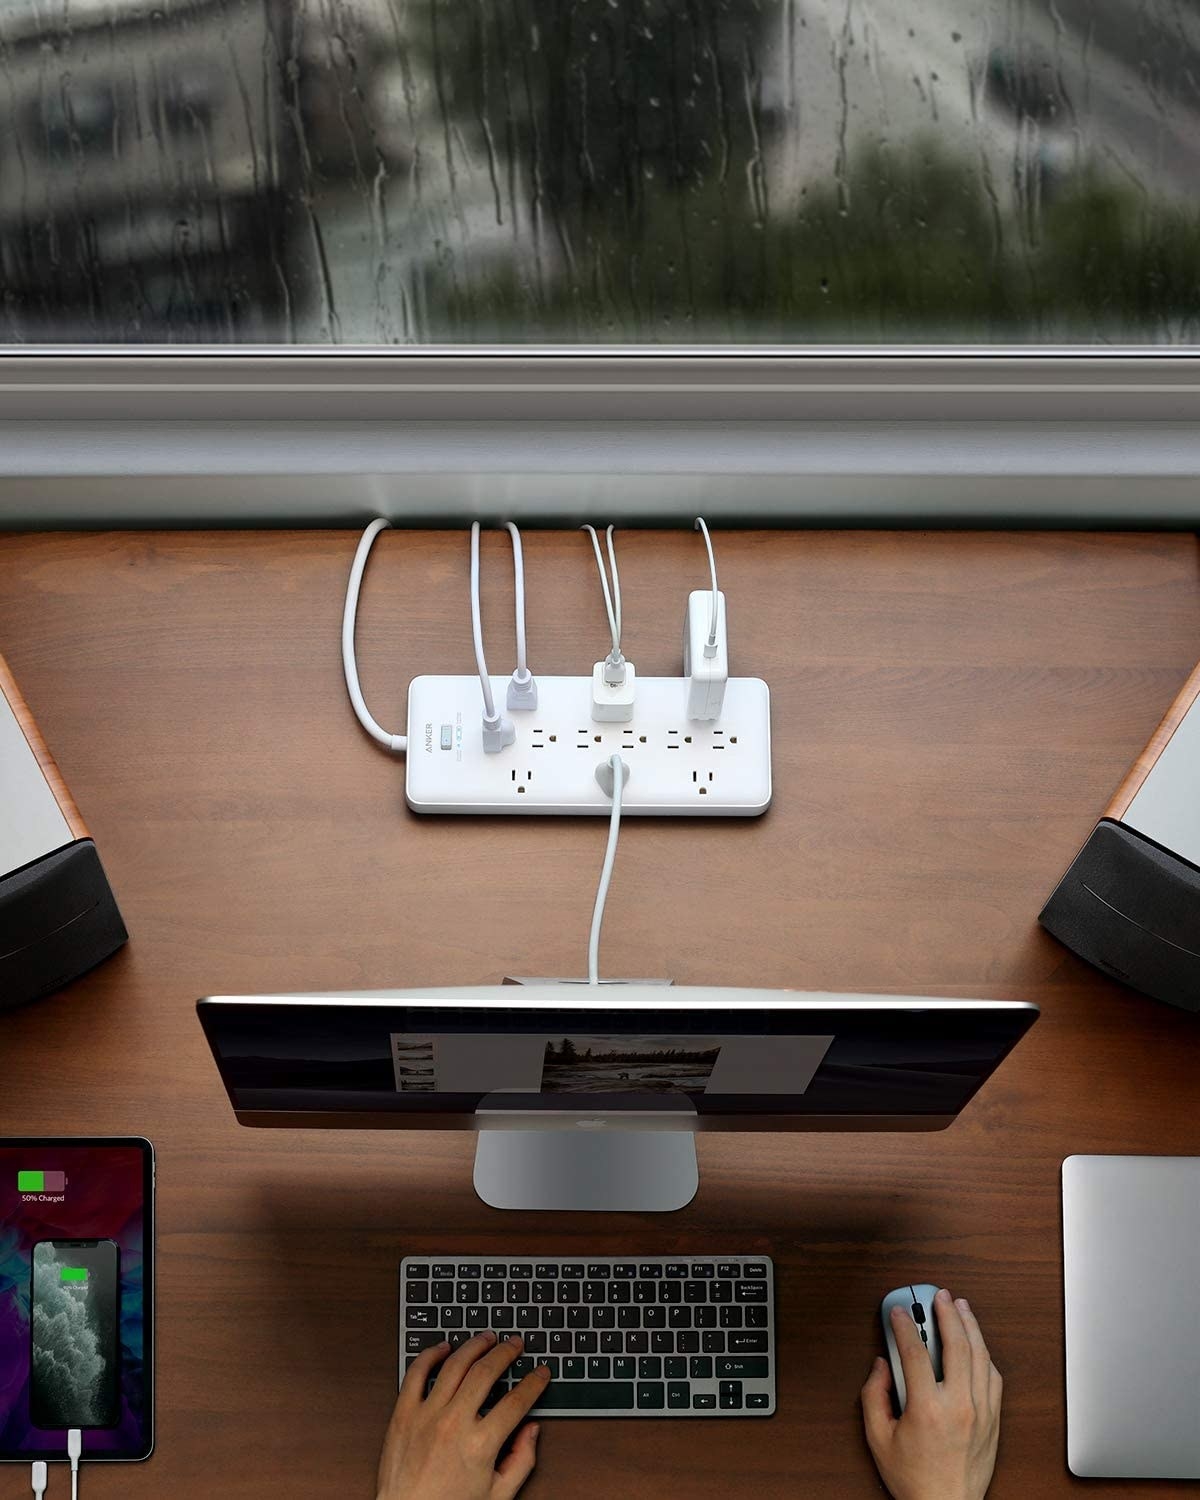 The power strip behind a monitor on a desk